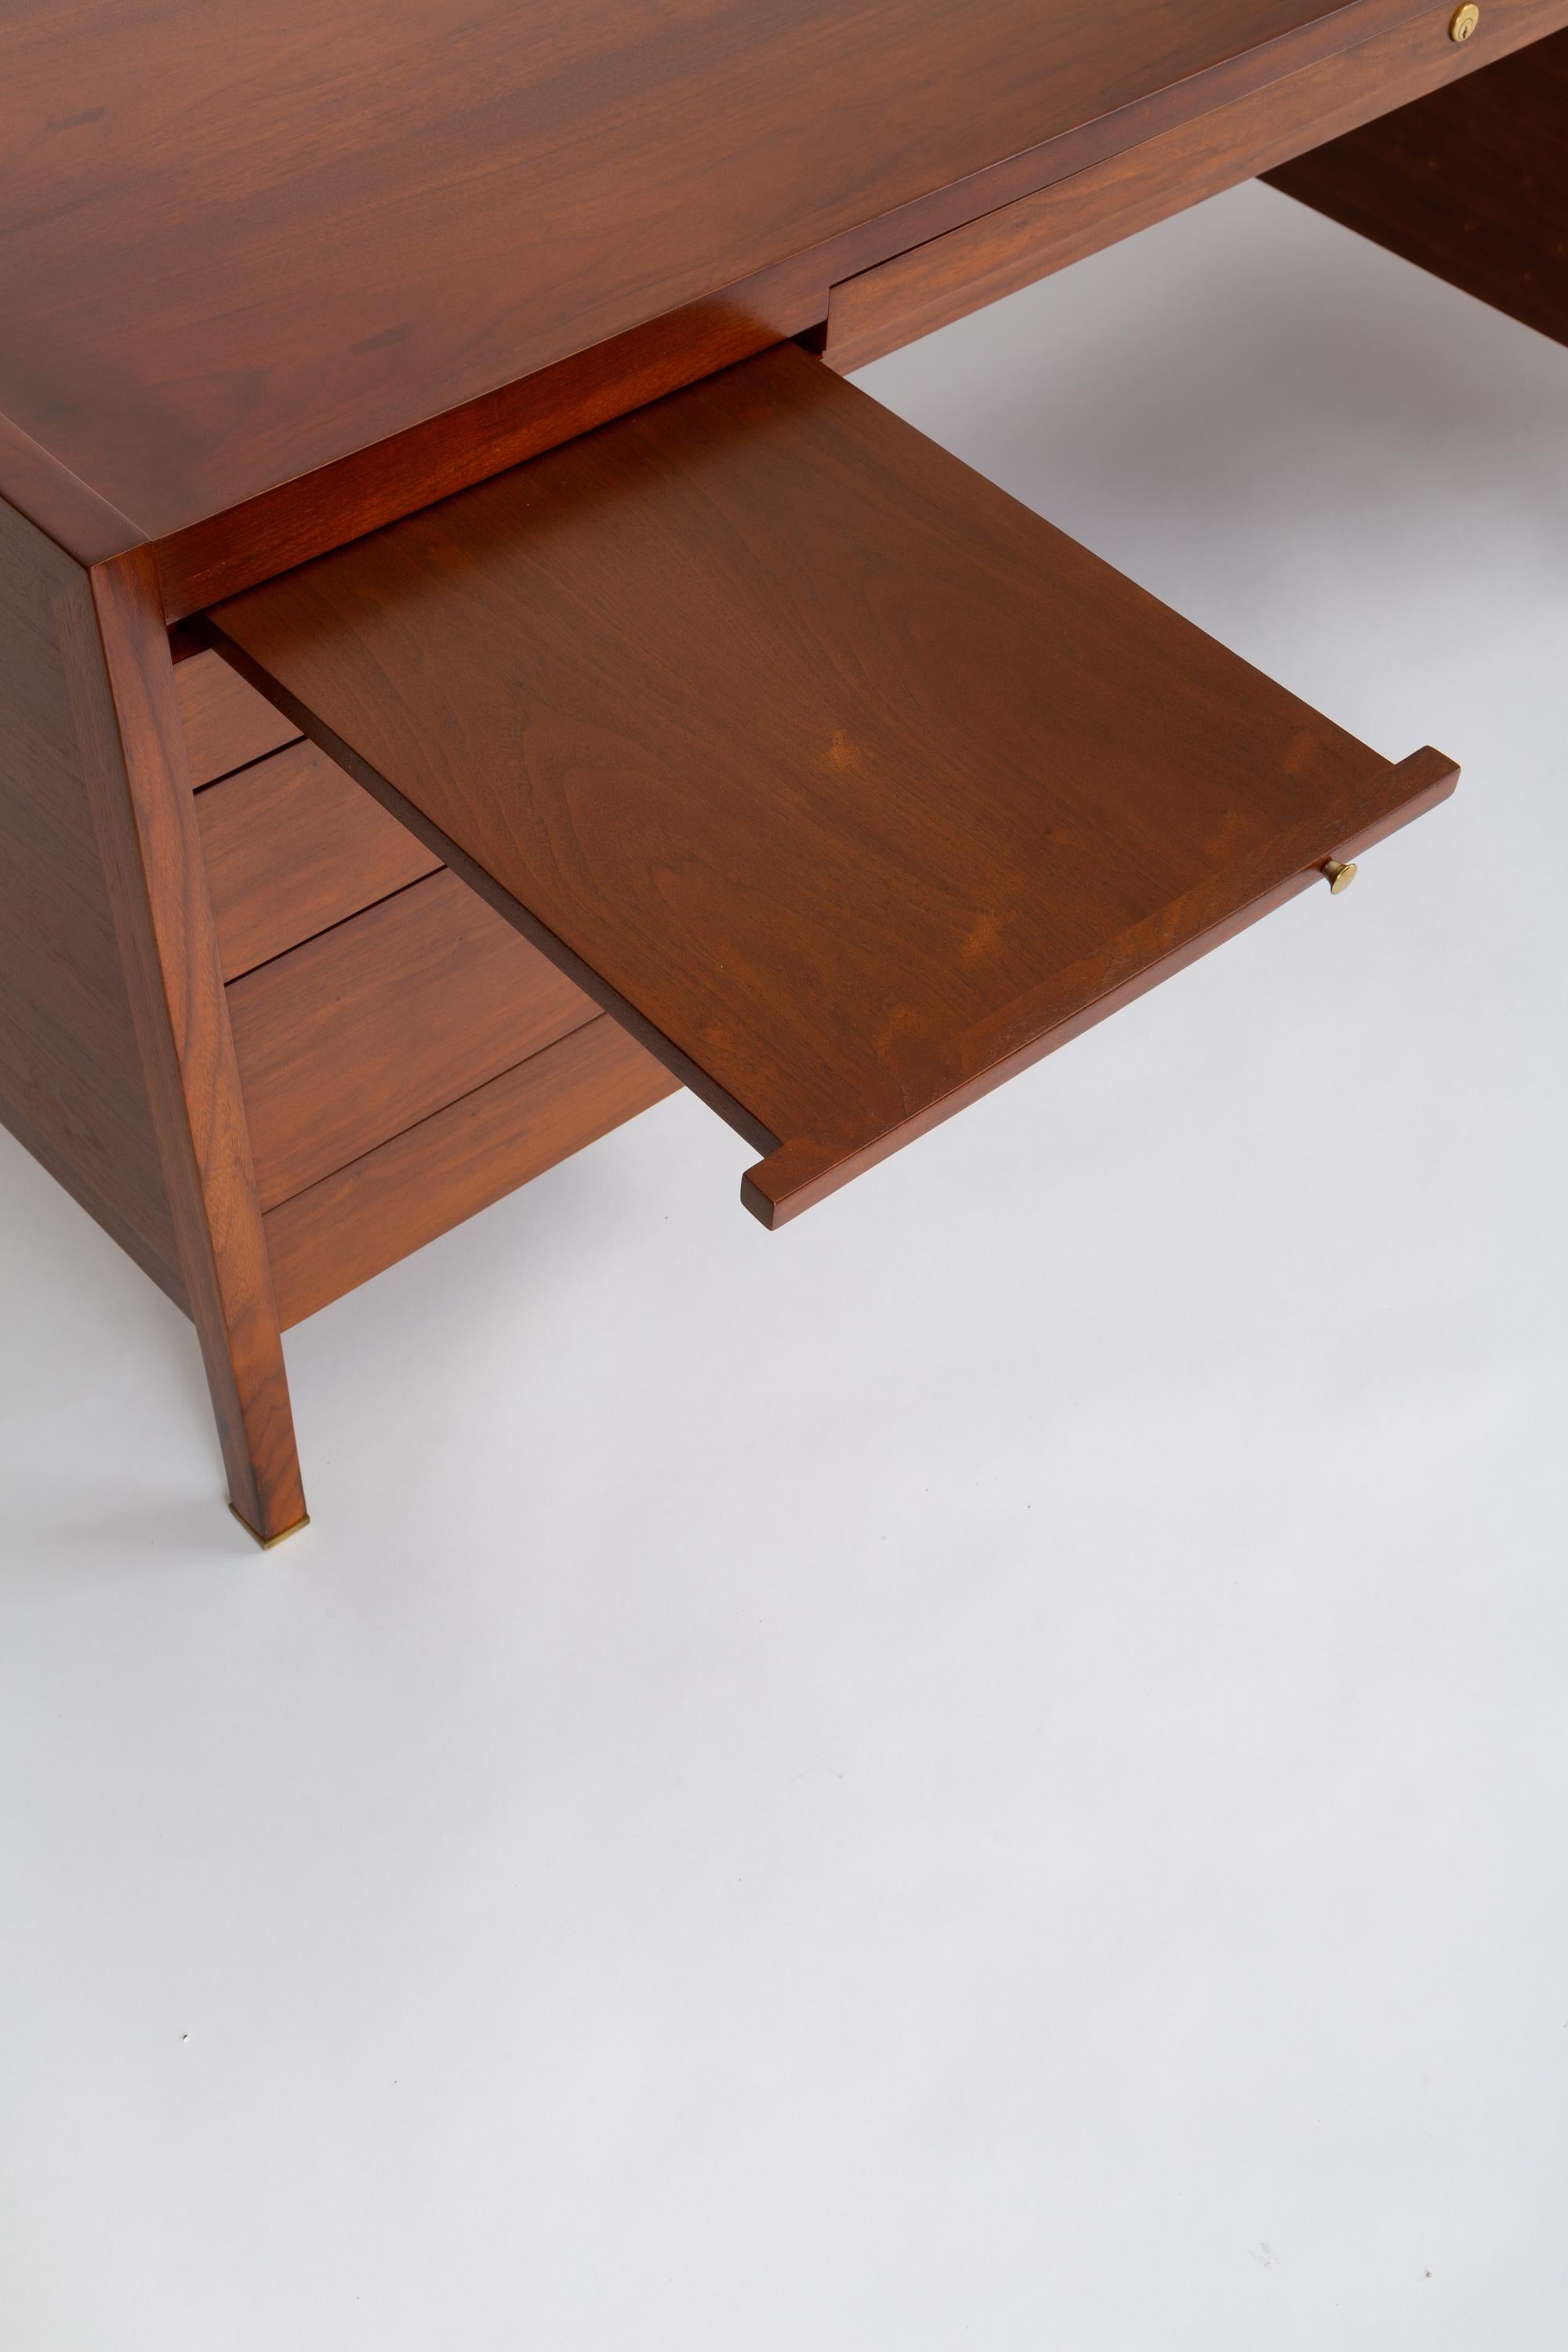 Walnut Executive Desk with Rosewood and Brass Details, Edward Wormley for Dunbar 4